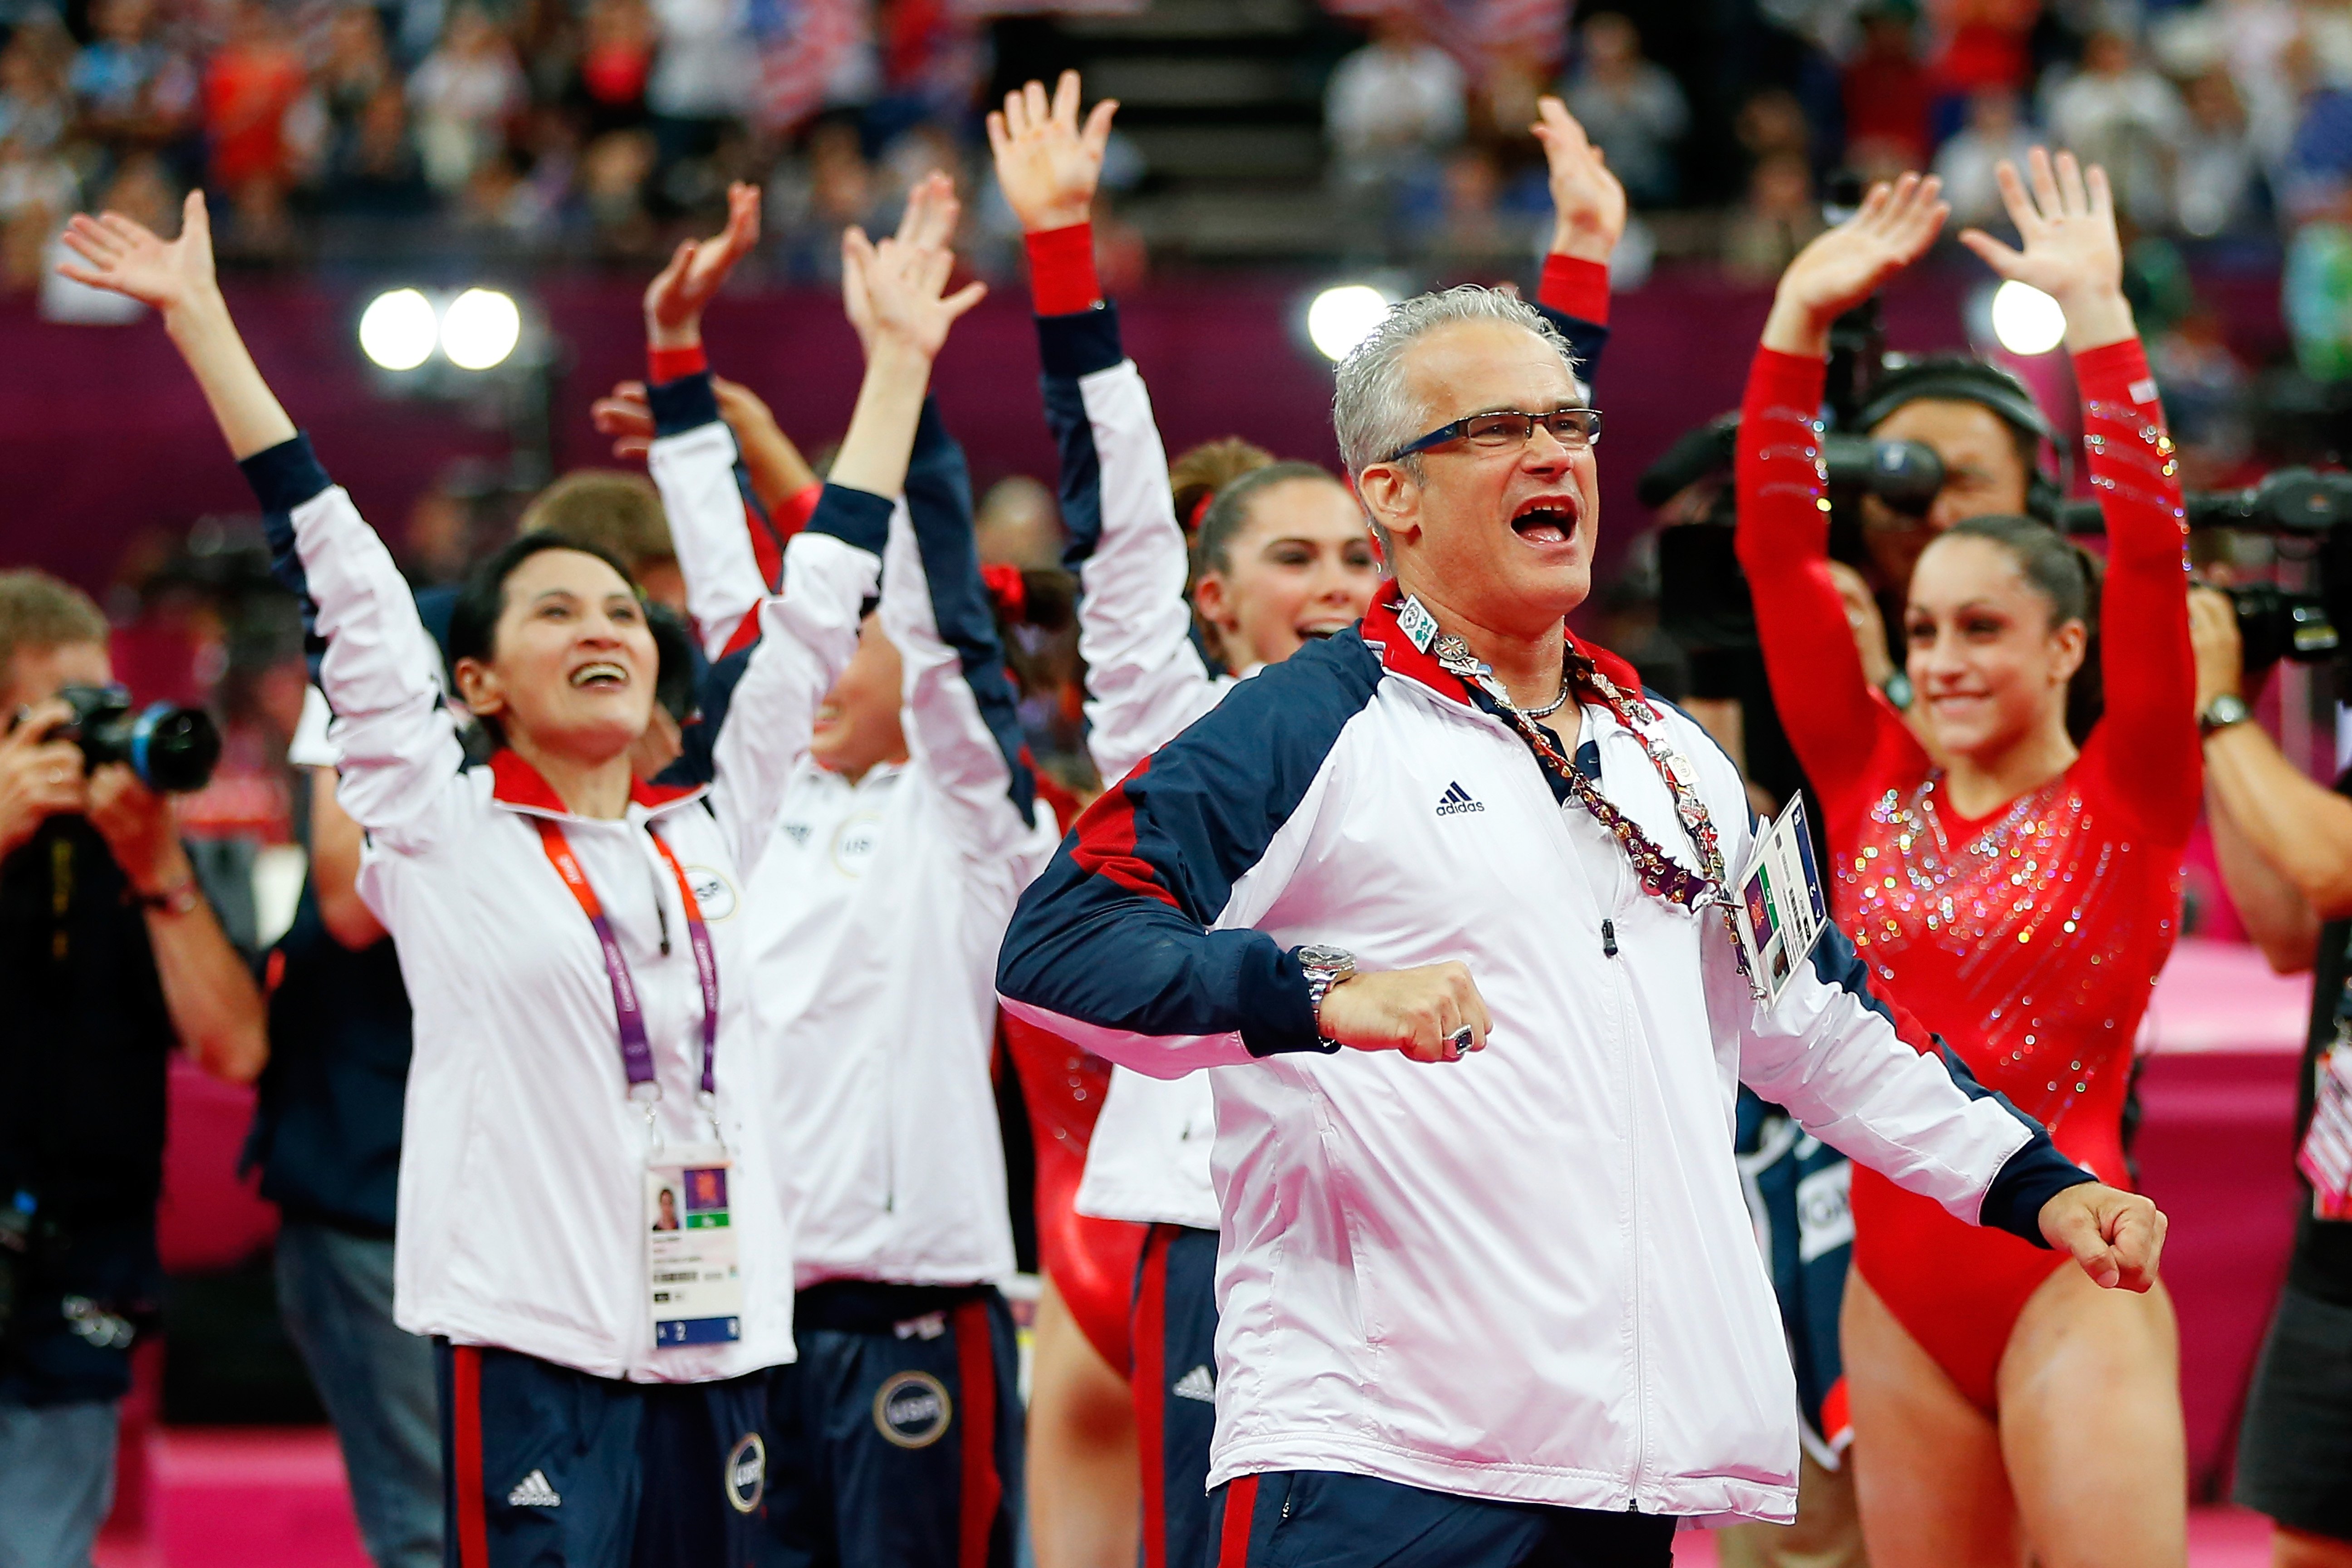 United States women's gymnastics coach John Geddert celebrating during the final rotation in the Artistic Gymnastics Women's Team final at the London 2012 Olympic Games at North Greenwich Arena in London, England | Photo: Jamie Squire/Getty Images